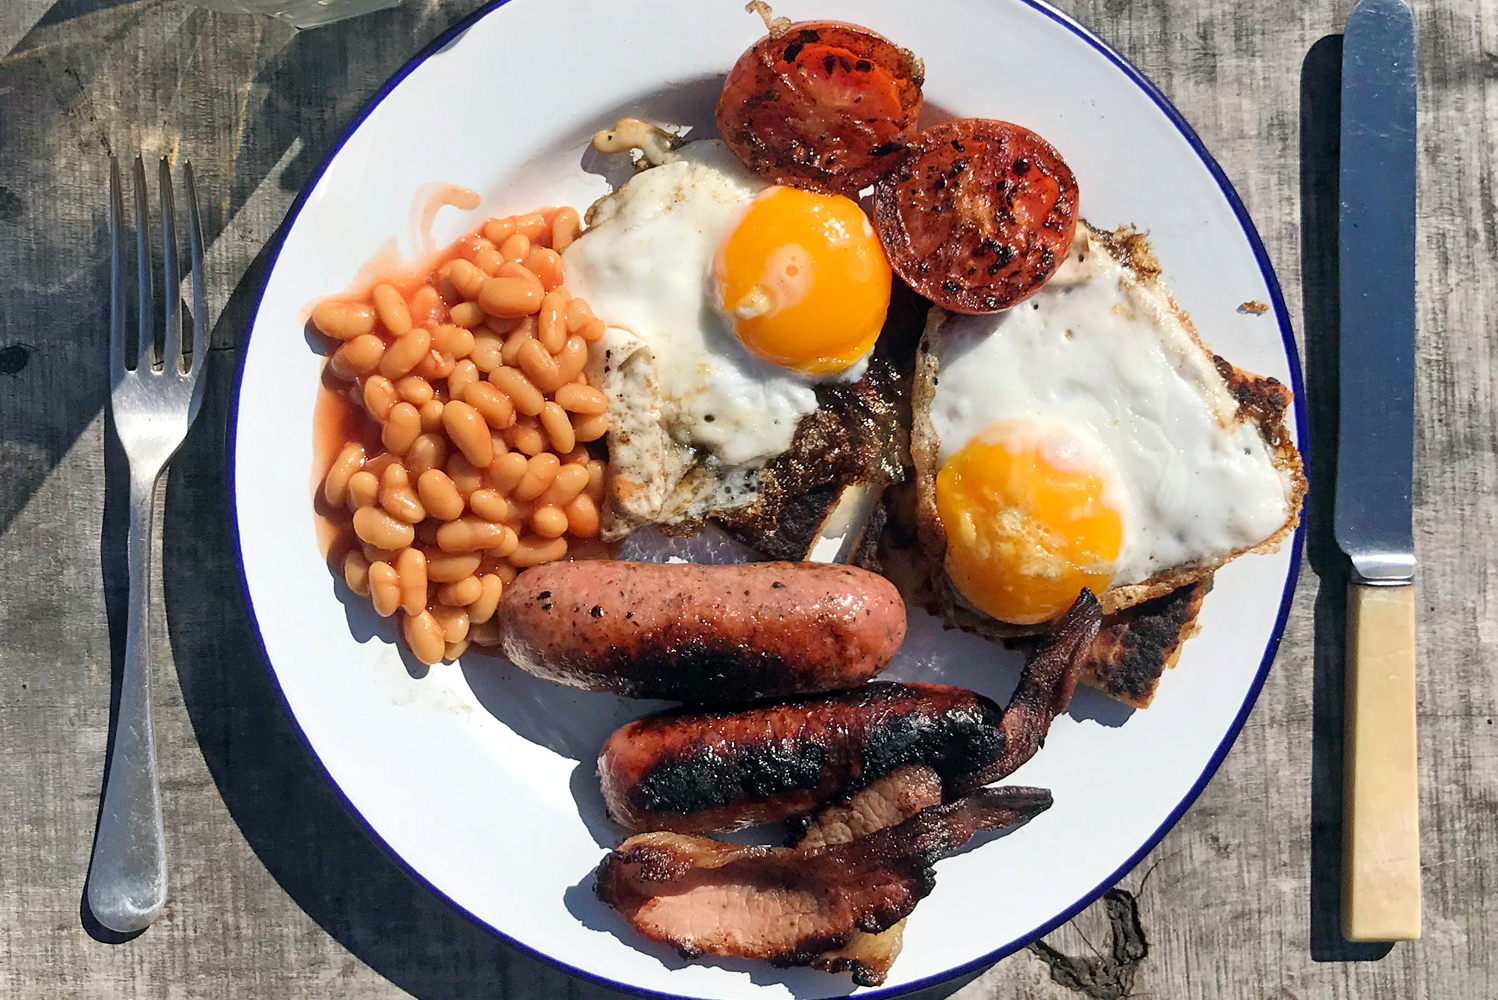 Pre-order one of our Breakfast Basket booking extras like this breakfast cooked on the campfire ready to eat outside on an enamel plate with retro cutlery